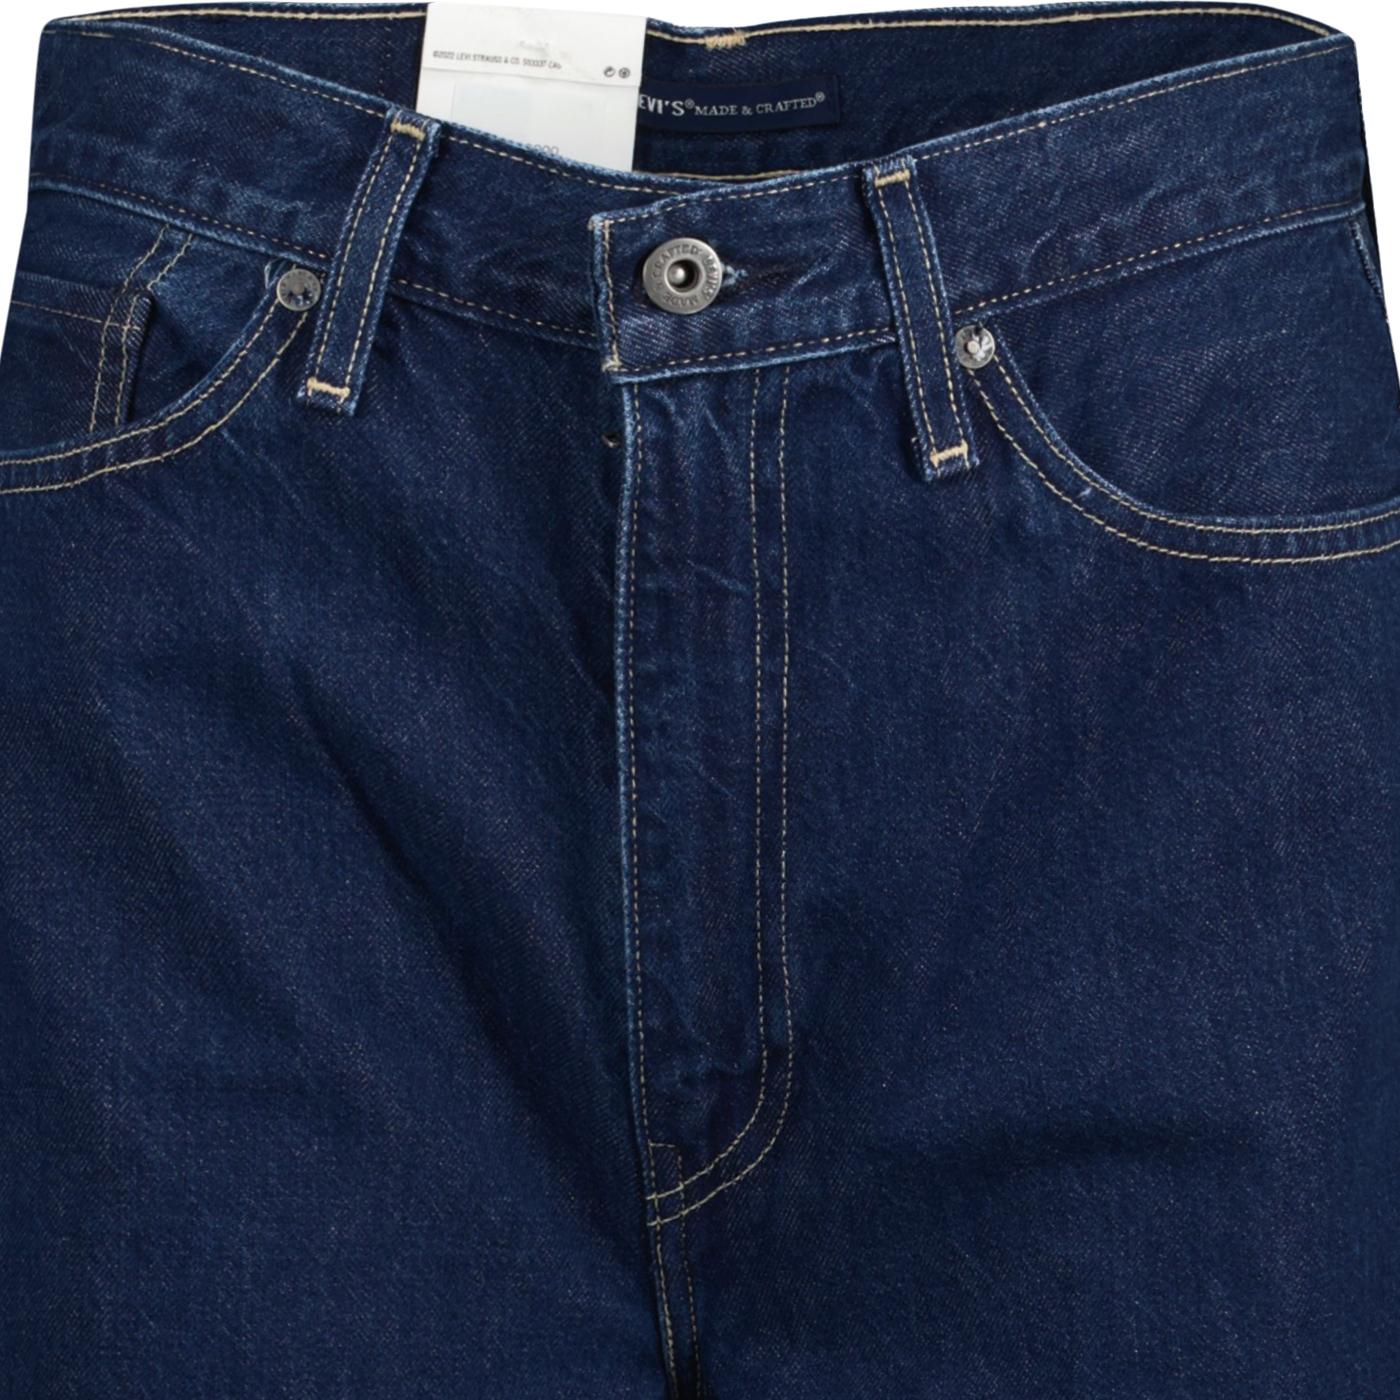 LEVI'S® MADE & CRAFTED® FULL FLARE JEANS Orbit Rinse